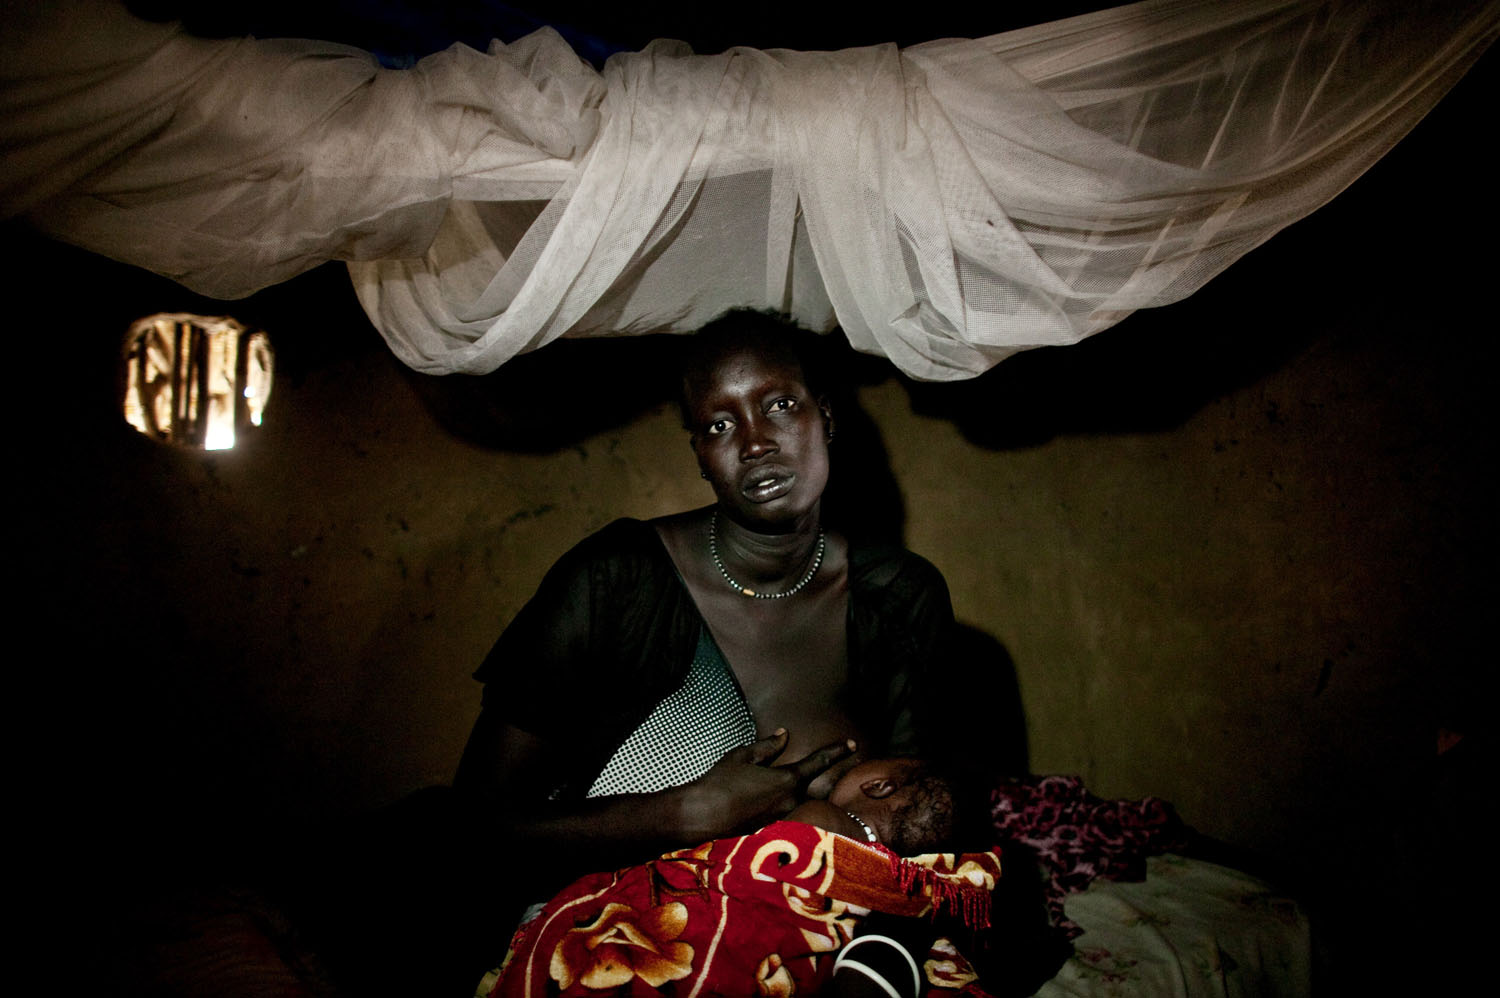 April 7, 2011. A survivor of a massacre in Fangak, southern Sudan. The massacre occurred when forces loyal to rebel General George Athor attacked the town of Fangak on Feb. 9 and 10. When the fighting ended, more than 200 people were dead, many of whom were civilians.